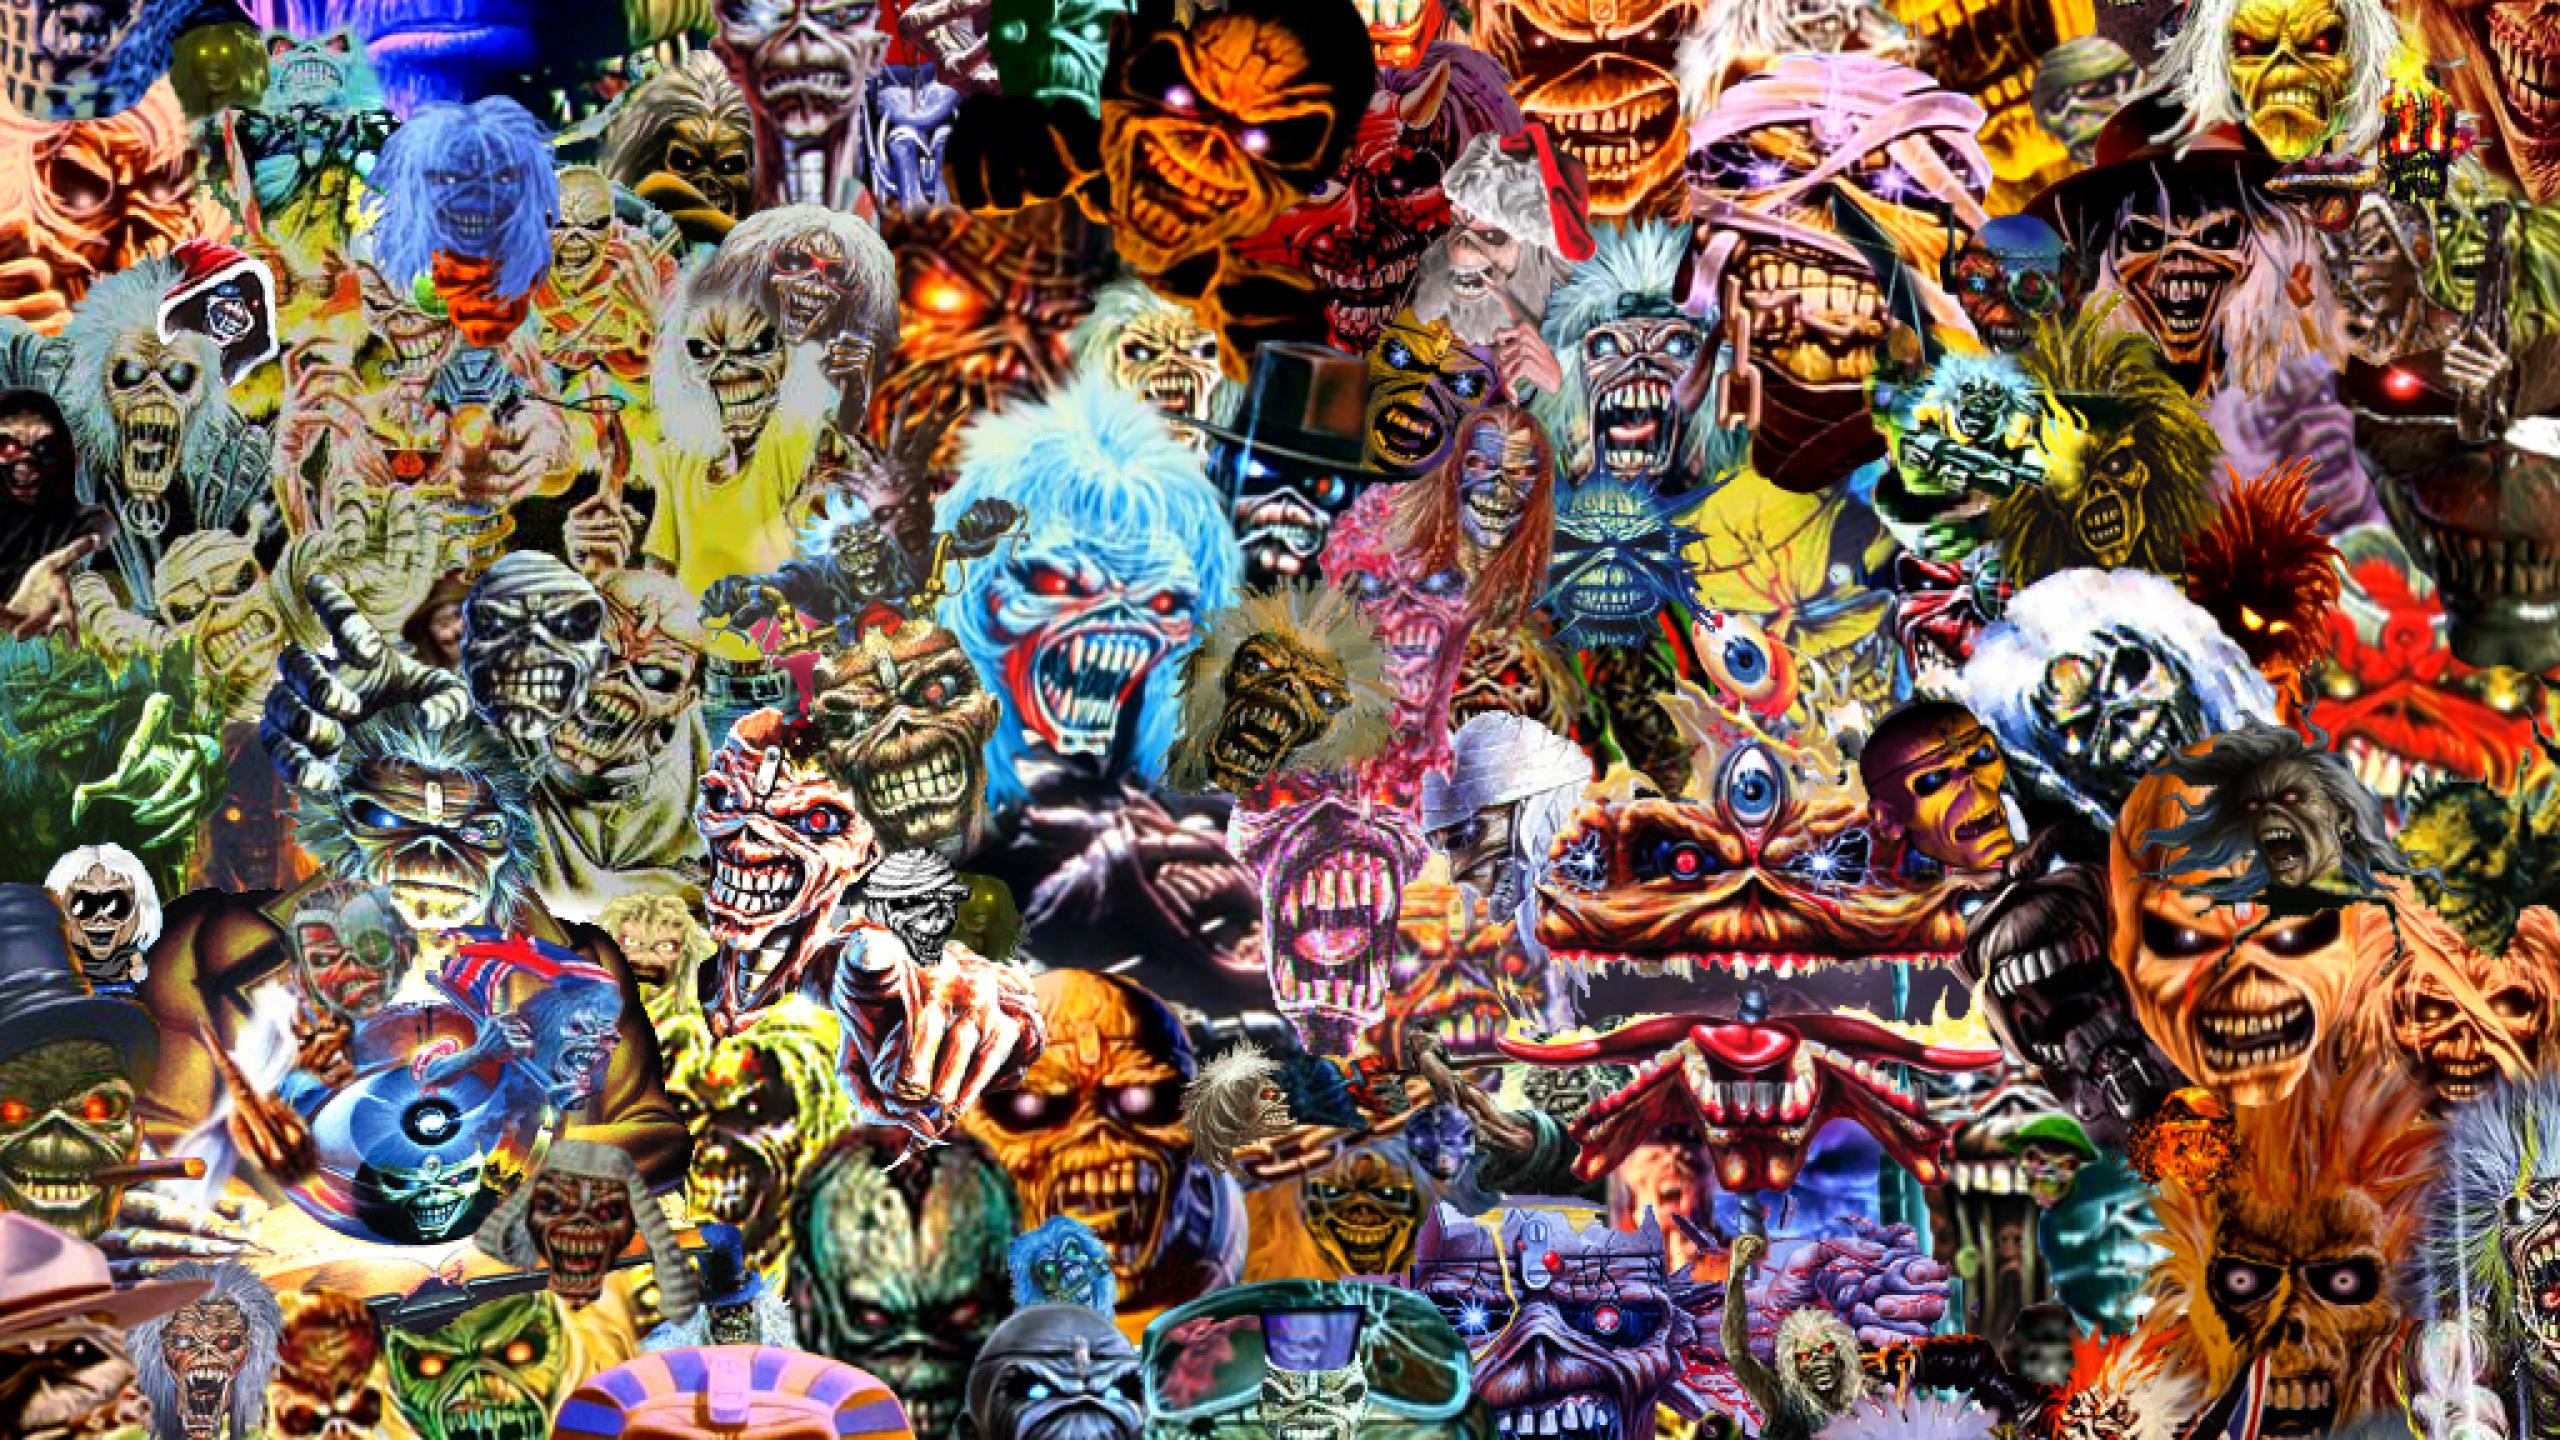 2560x1440 The headbangers \m/\m/ images iron maiden eddie cool faces entertainment   hd wallpaper 469033 HD wallpaper and background photos